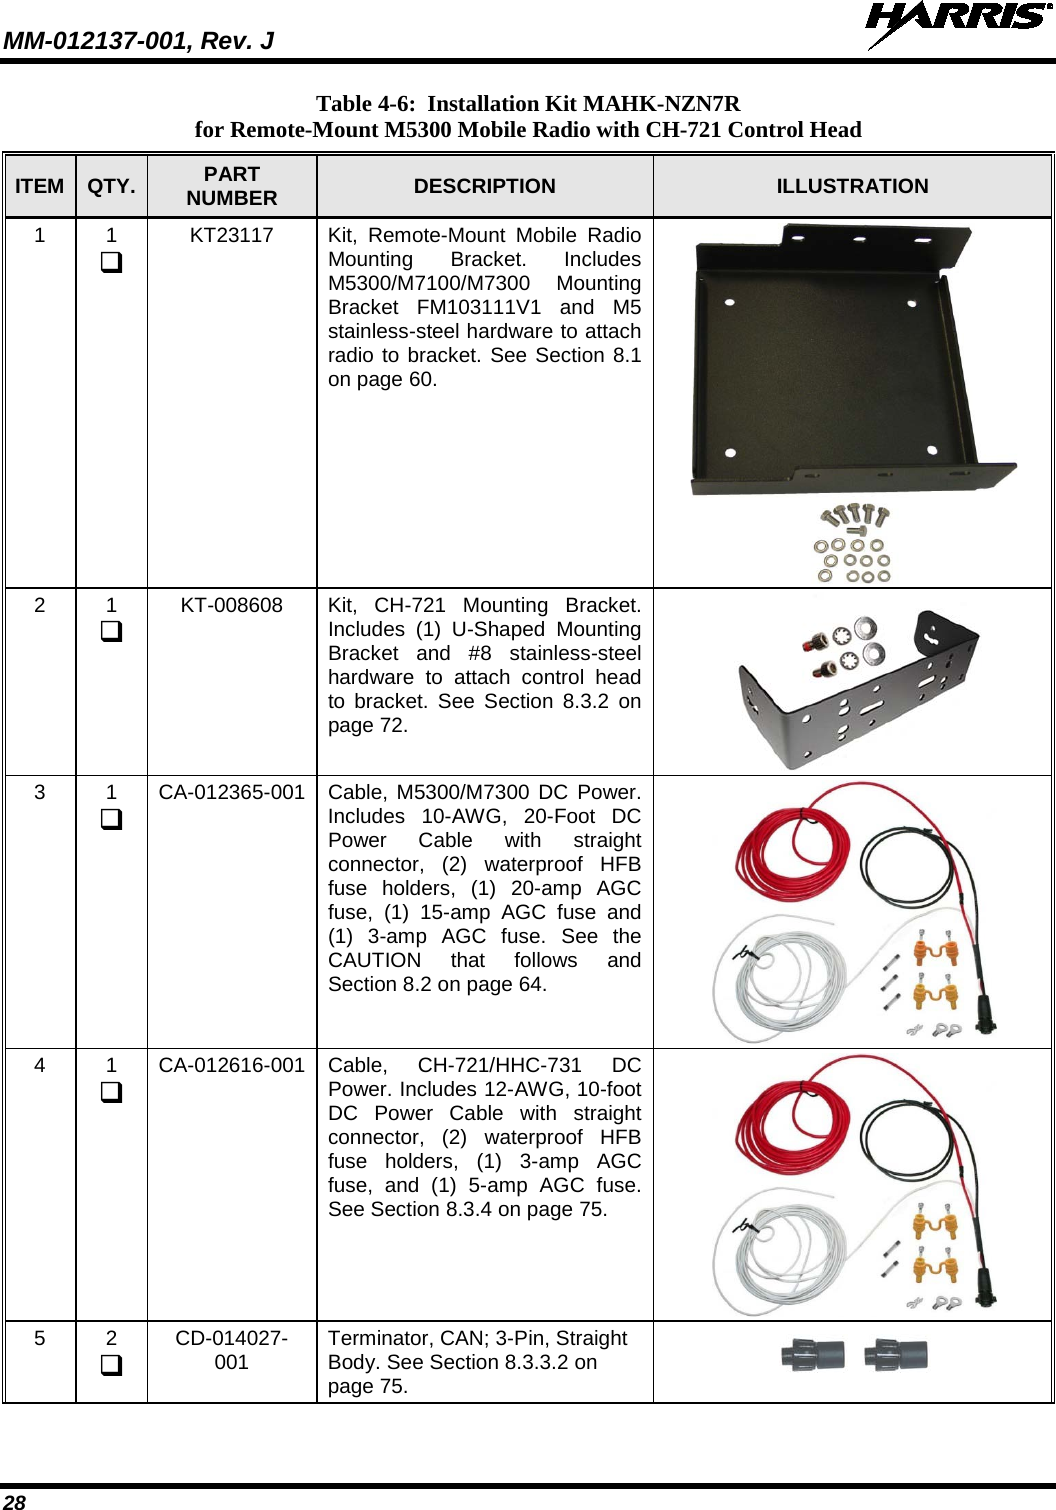 MM-012137-001, Rev. J   28 Table 4-6:  Installation Kit MAHK-NZN7R for Remote-Mount M5300 Mobile Radio with CH-721 Control Head ITEM QTY. PART NUMBER DESCRIPTION ILLUSTRATION 1  1  KT23117 Kit, Remote-Mount Mobile Radio Mounting Bracket. Includes M5300/M7100/M7300 Mounting Bracket FM103111V1 and M5 stainless-steel hardware to attach radio to bracket. See Section 8.1 on page 60.  2  1  KT-008608 Kit, CH-721 Mounting Bracket. Includes (1) U-Shaped Mounting Bracket and #8 stainless-steel hardware to attach control head to bracket. See Section 8.3.2 on page 72.  3  1  CA-012365-001 Cable, M5300/M7300 DC Power. Includes 10-AWG, 20-Foot DC Power Cable with straight connector, (2) waterproof HFB fuse holders, (1)  20-amp AGC fuse,  (1) 15-amp AGC fuse and (1) 3-amp AGC fuse. See  the CAUTION that follows and Section 8.2 on page 64.  4  1  CA-012616-001 Cable, CH-721/HHC-731 DC Power. Includes 12-AWG, 10-foot DC Power Cable with straight connector, (2) waterproof HFB fuse holders, (1) 3-amp AGC fuse, and (1) 5-amp AGC fuse. See Section 8.3.4 on page 75.  5  2  CD-014027-001 Terminator, CAN; 3-Pin, Straight Body. See Section 8.3.3.2 on page 75.       